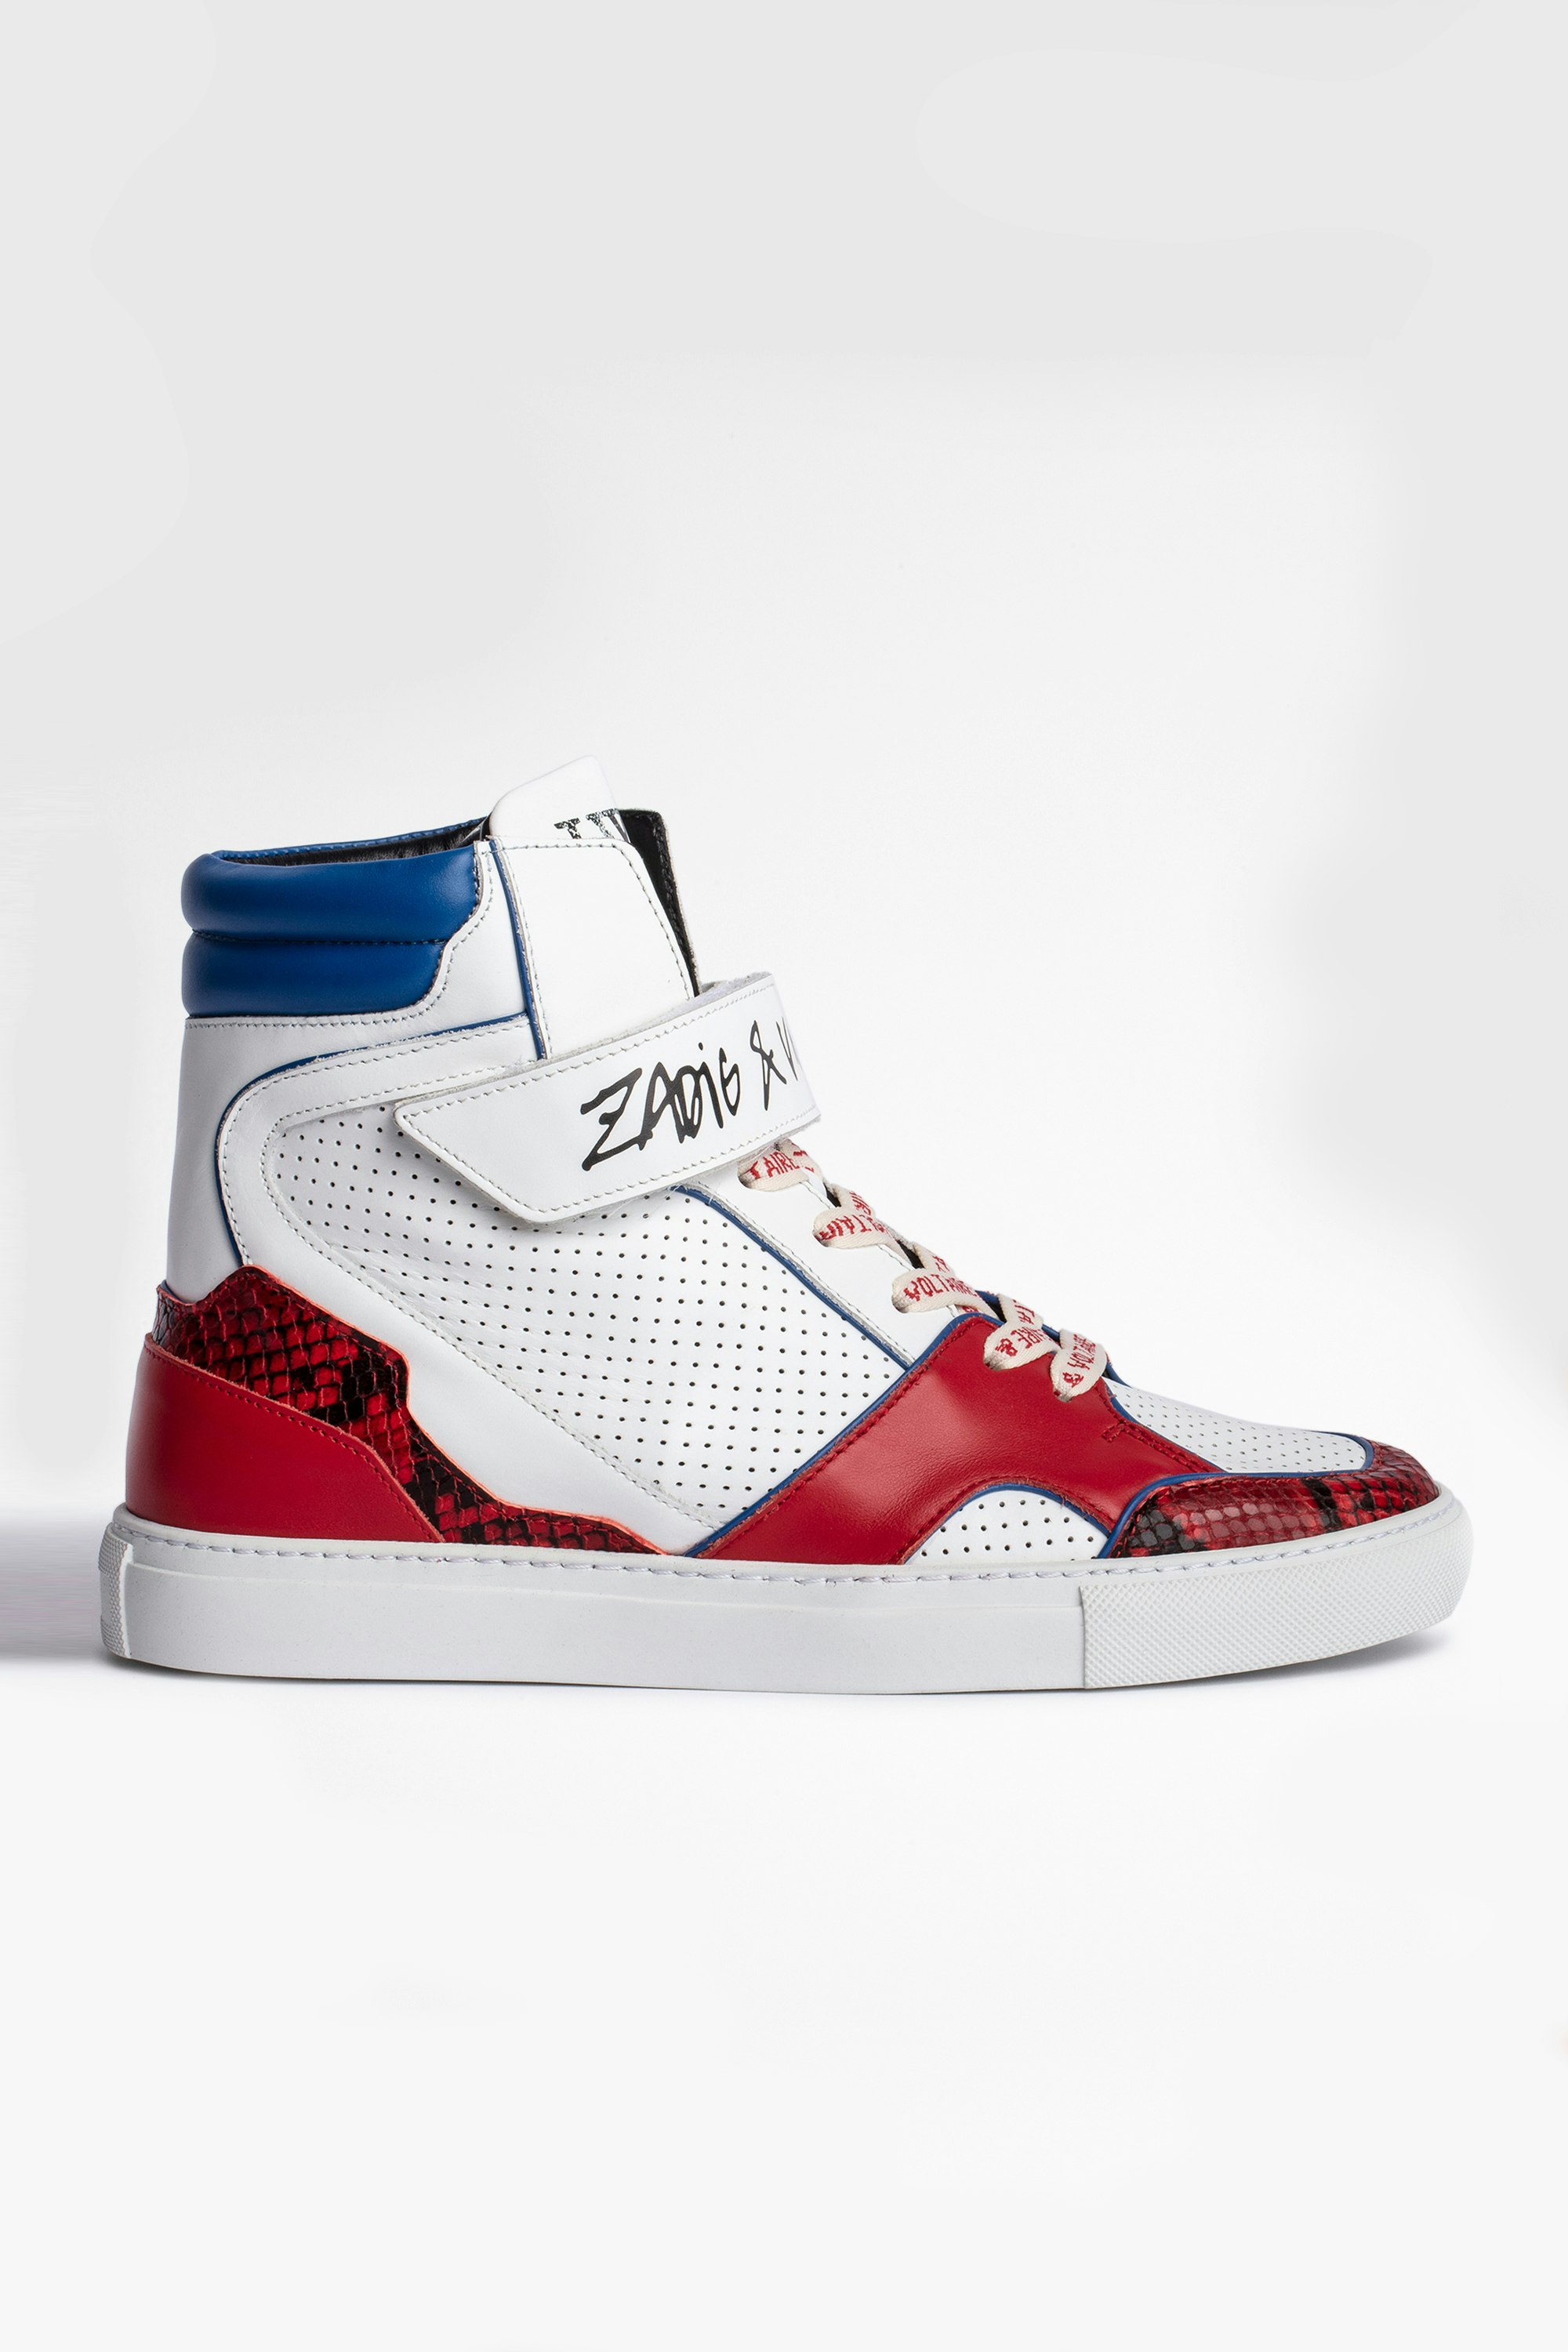 ZV1747 High Flash スニーカー Women's high-top trainers in tricolored leather. Buying this product, you support a responsible leather production through Leather Working Group.